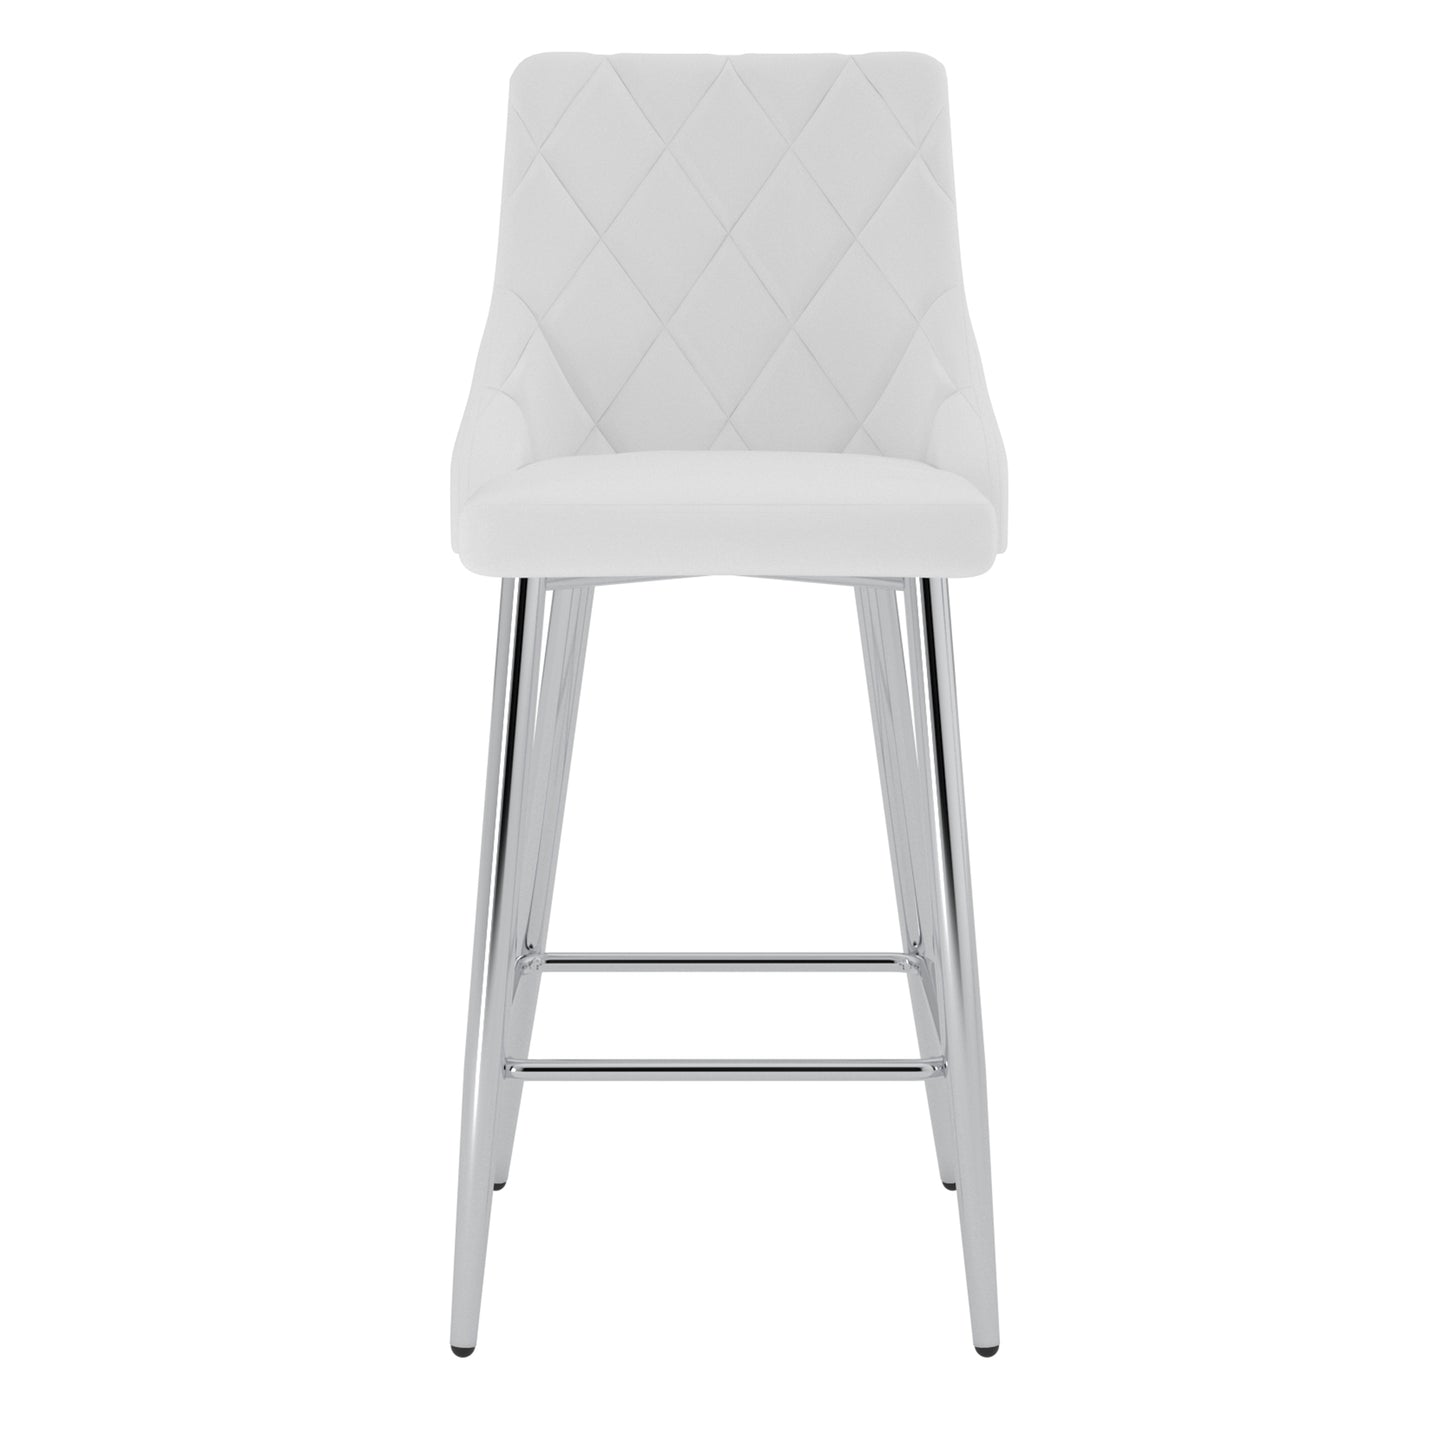 (DEVO WHITE- 2 PACK)- LEATHER COUNTER STOOLS